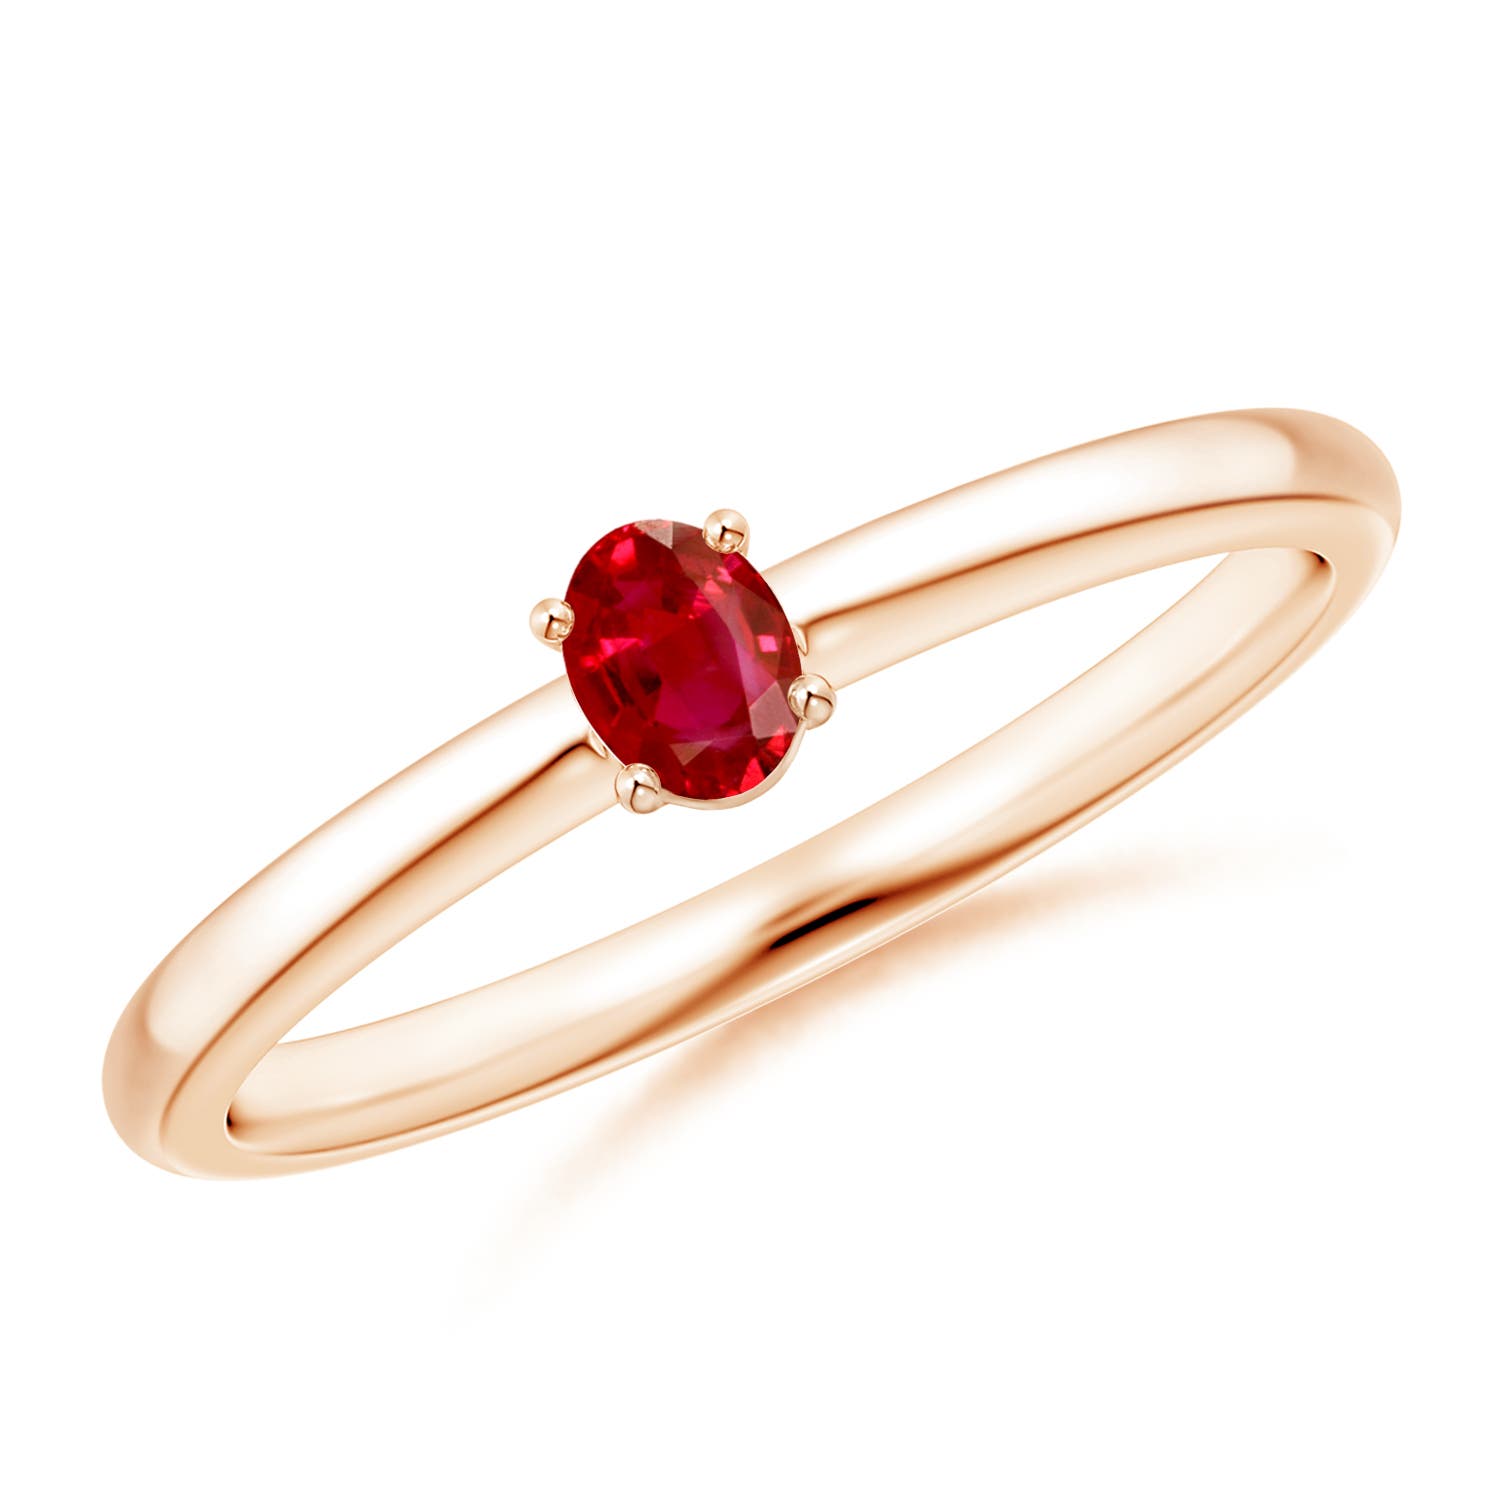 AAA - Ruby / 0.2 CT / 14 KT Rose Gold